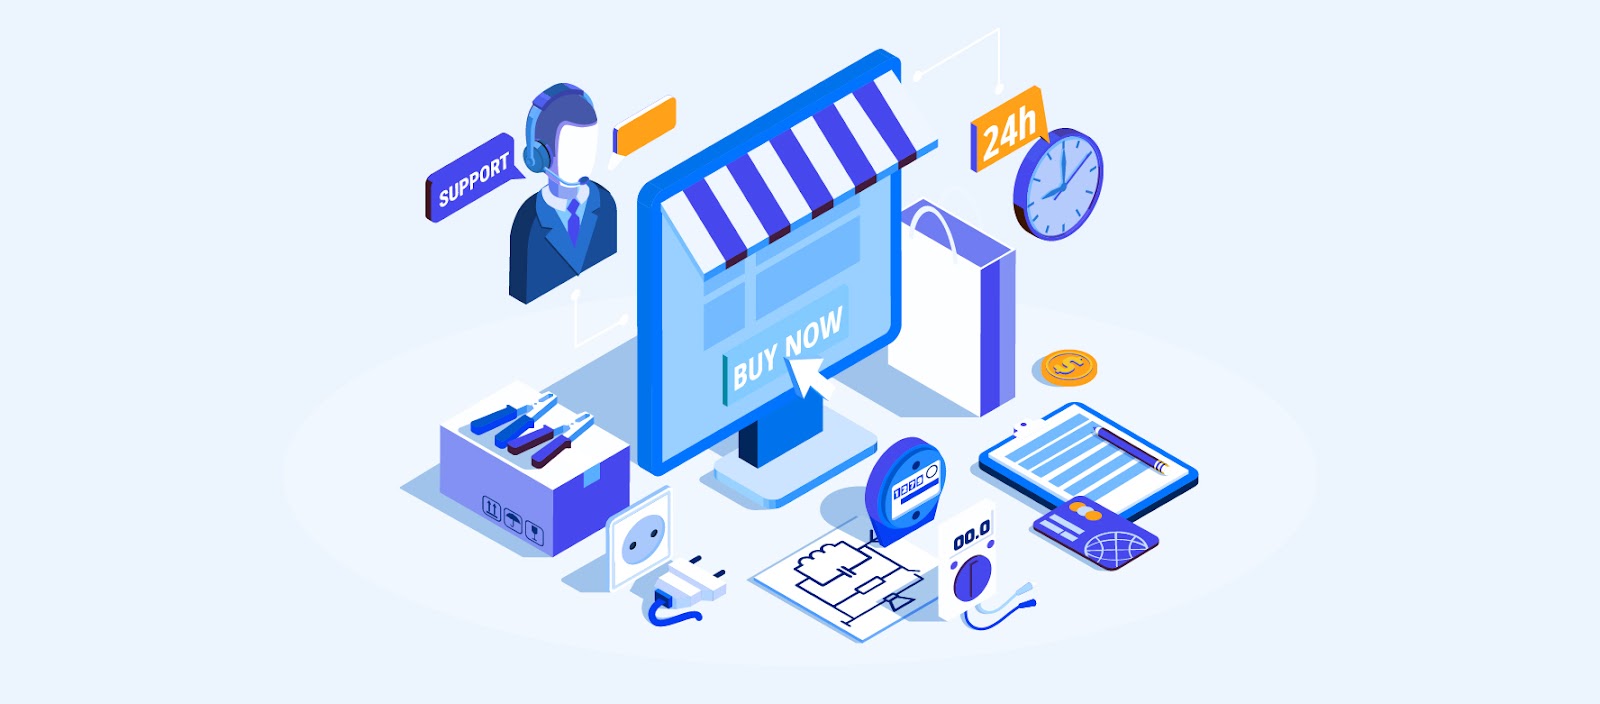 ecommerce business process